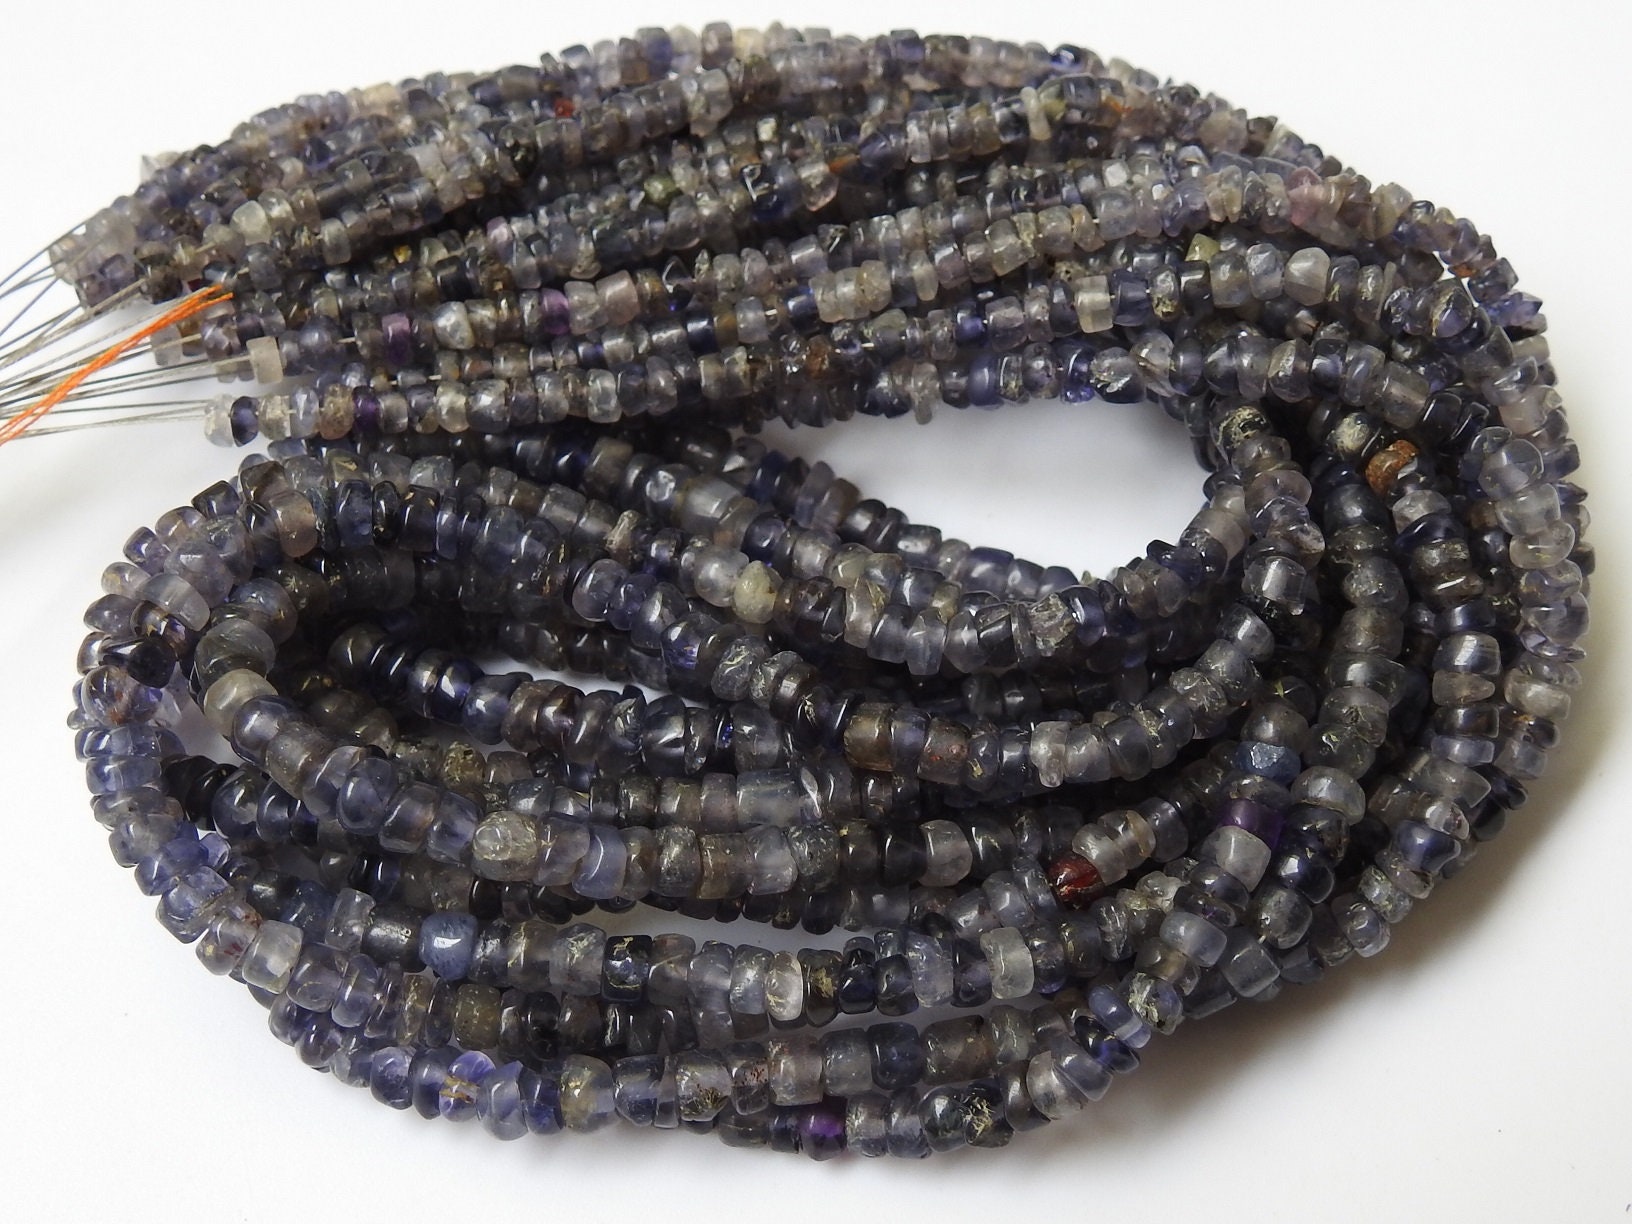 Natural Blue Iolite Smooth Handmade Beads,Roundel Shape,Loose Stone,For Making Jewelry,Wholesale Price,New Arrival,16Inch Strand B10 | Save 33% - Rajasthan Living 18